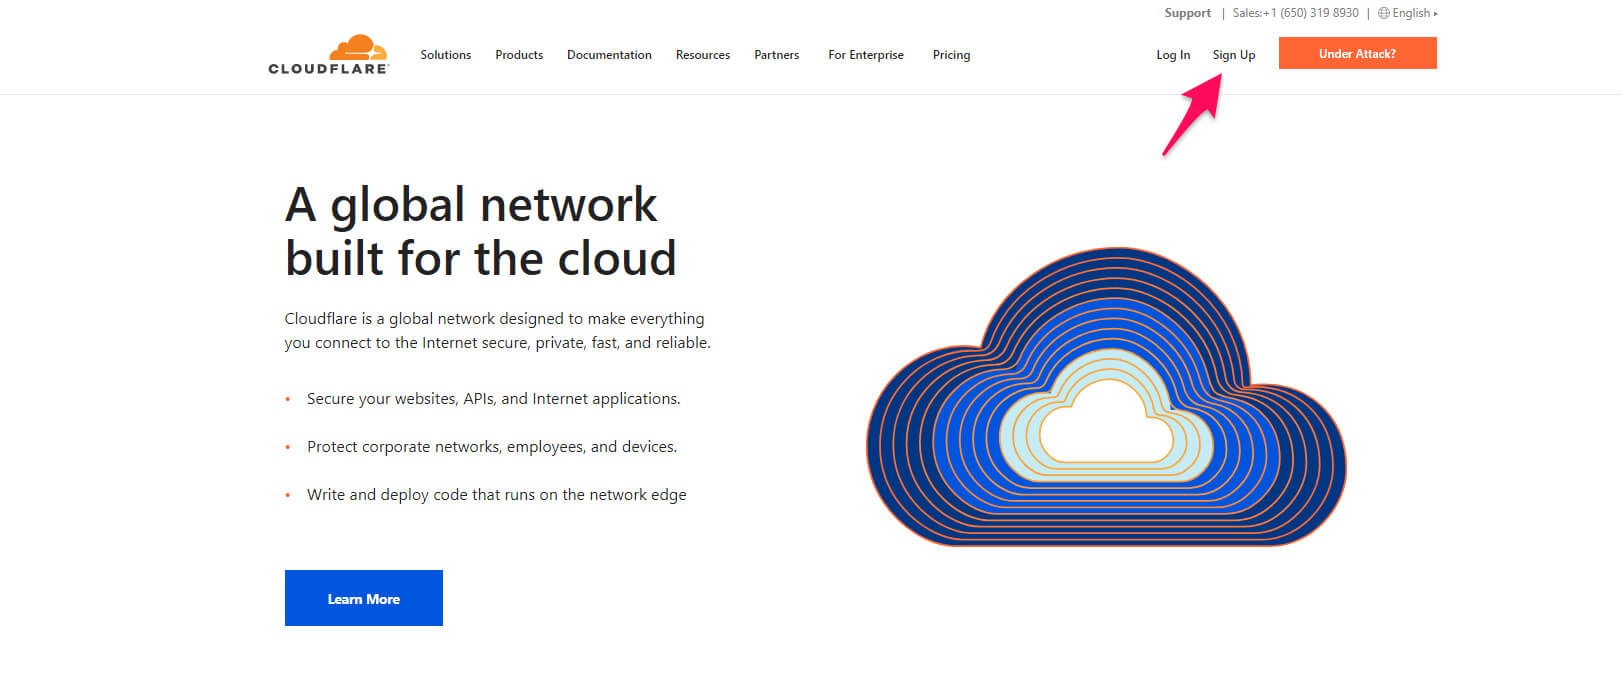 A global networl built for the cloud